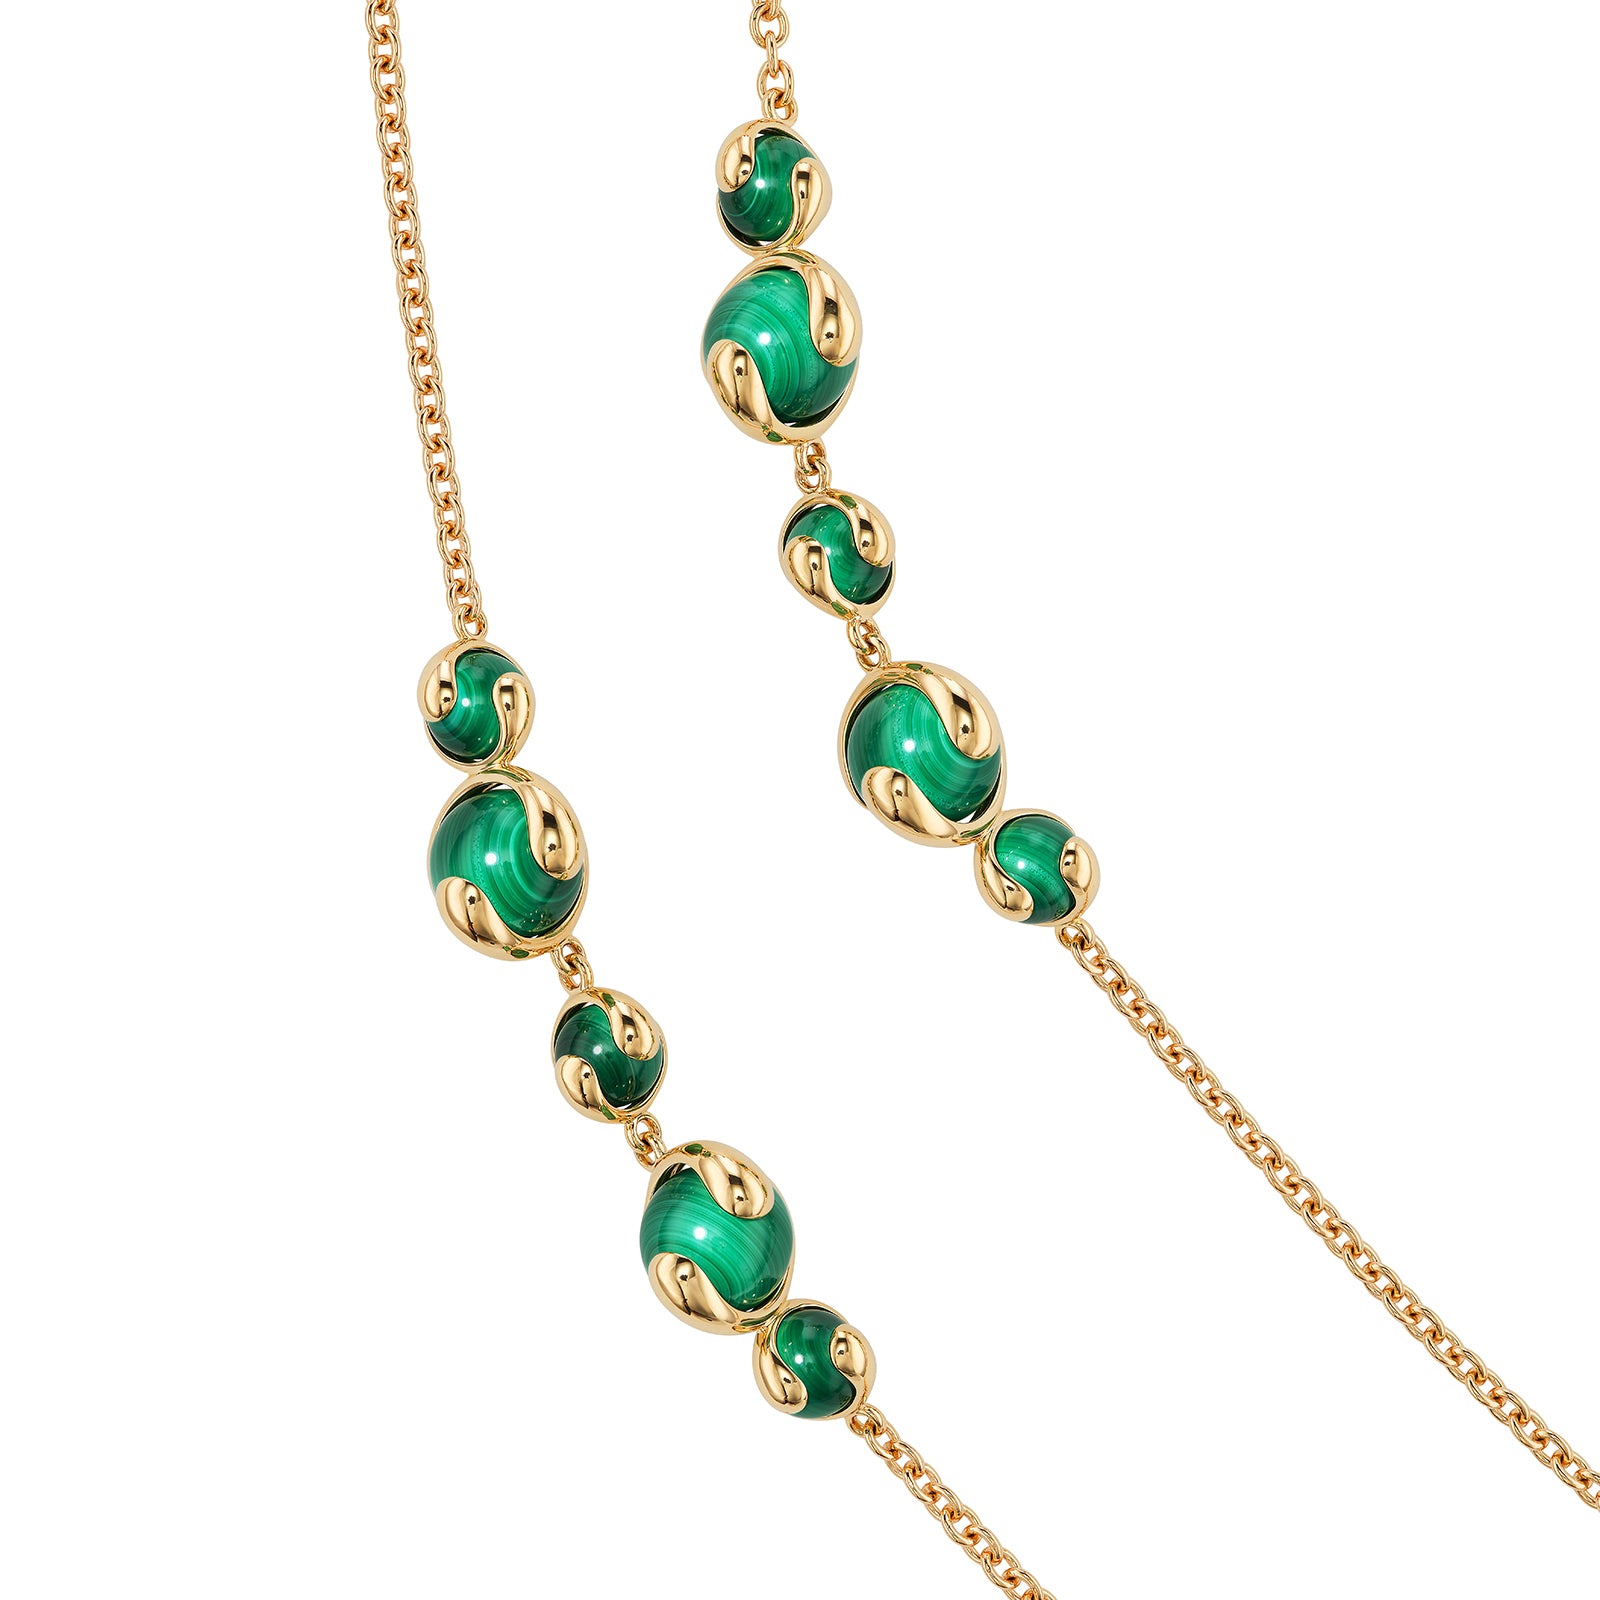 Fred Leighton Has New Line of Beaded Necklaces - The New York Times